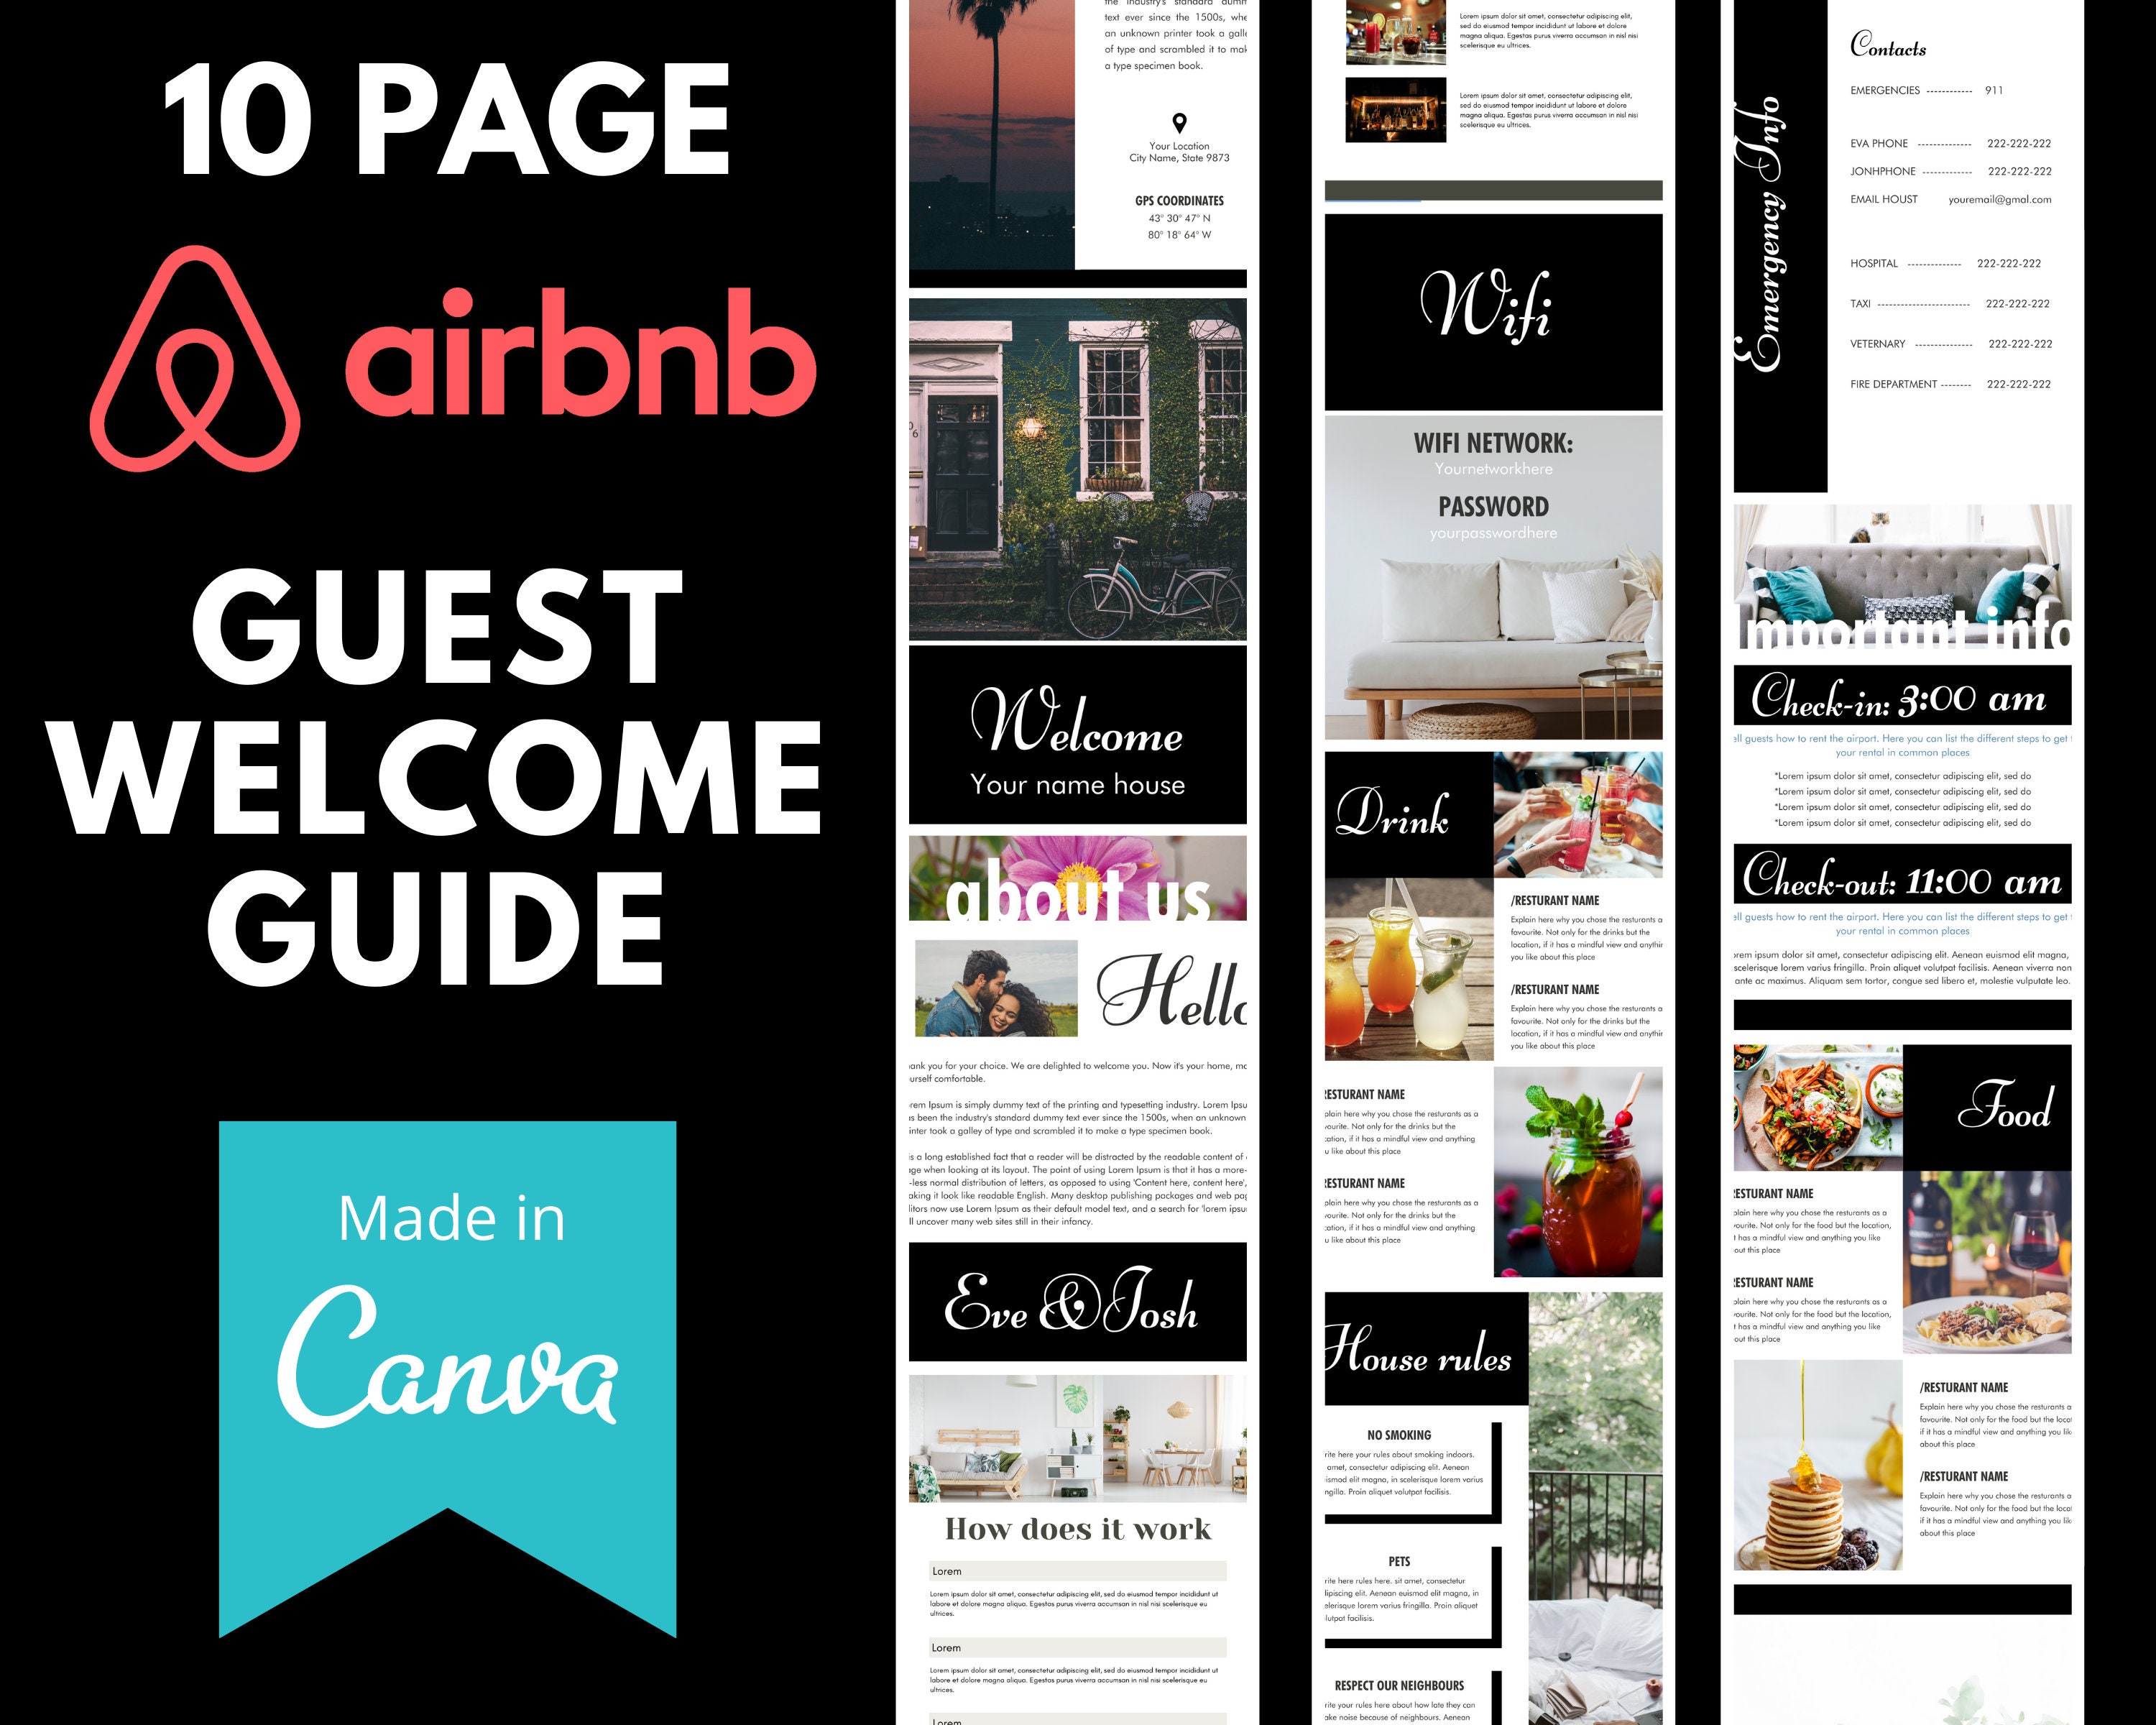 airbnb-welcome-book-template-10-page-host-guidebook-etsy